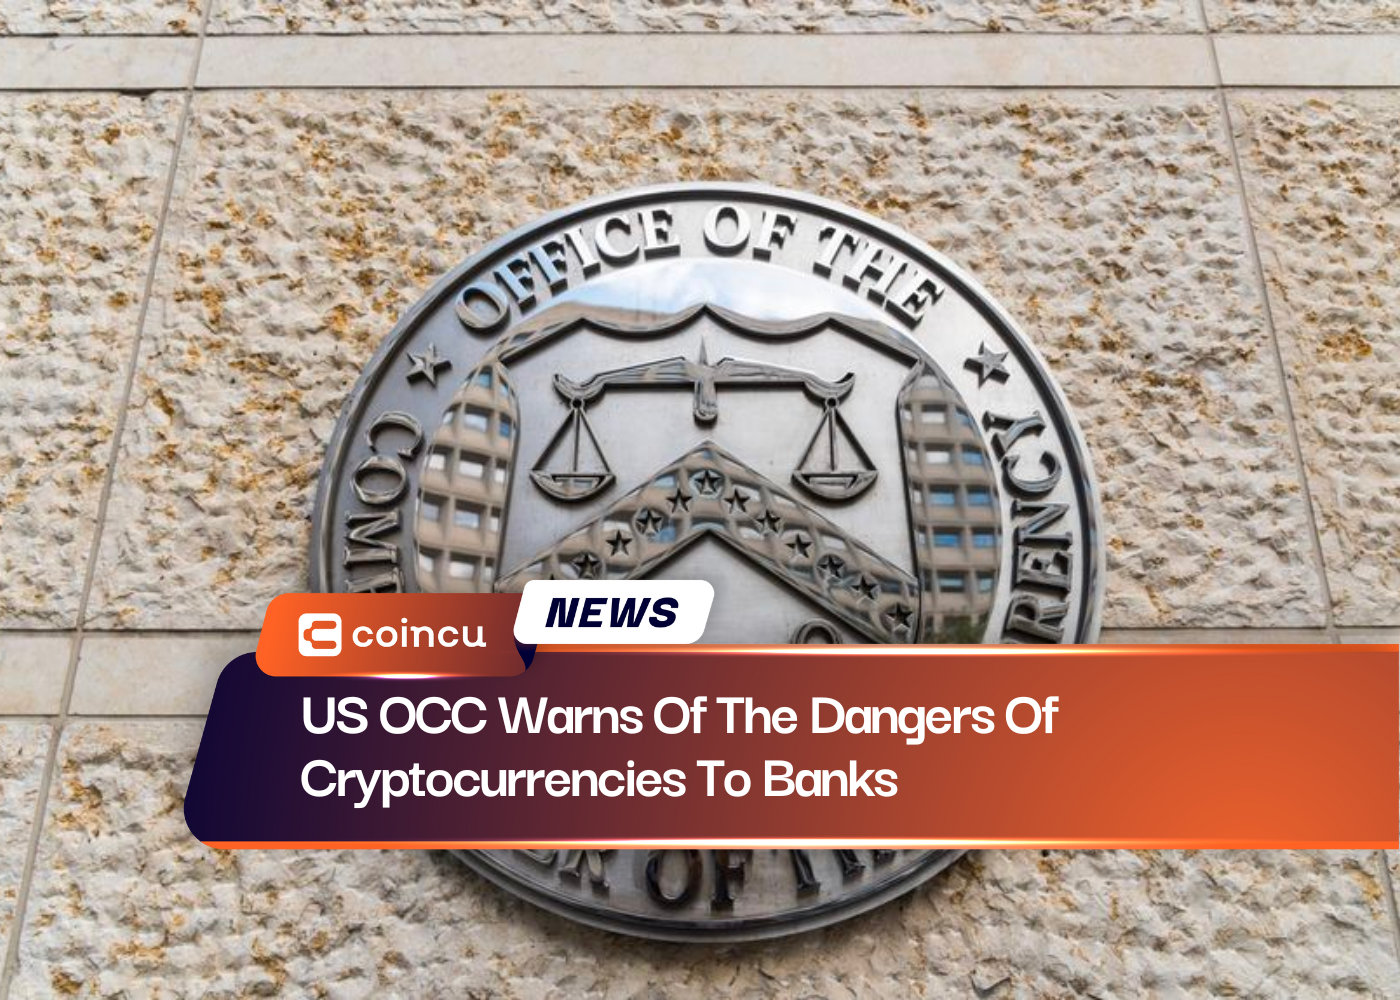 US OCC Warns Of The Dangers Of Cryptocurrencies To Banks